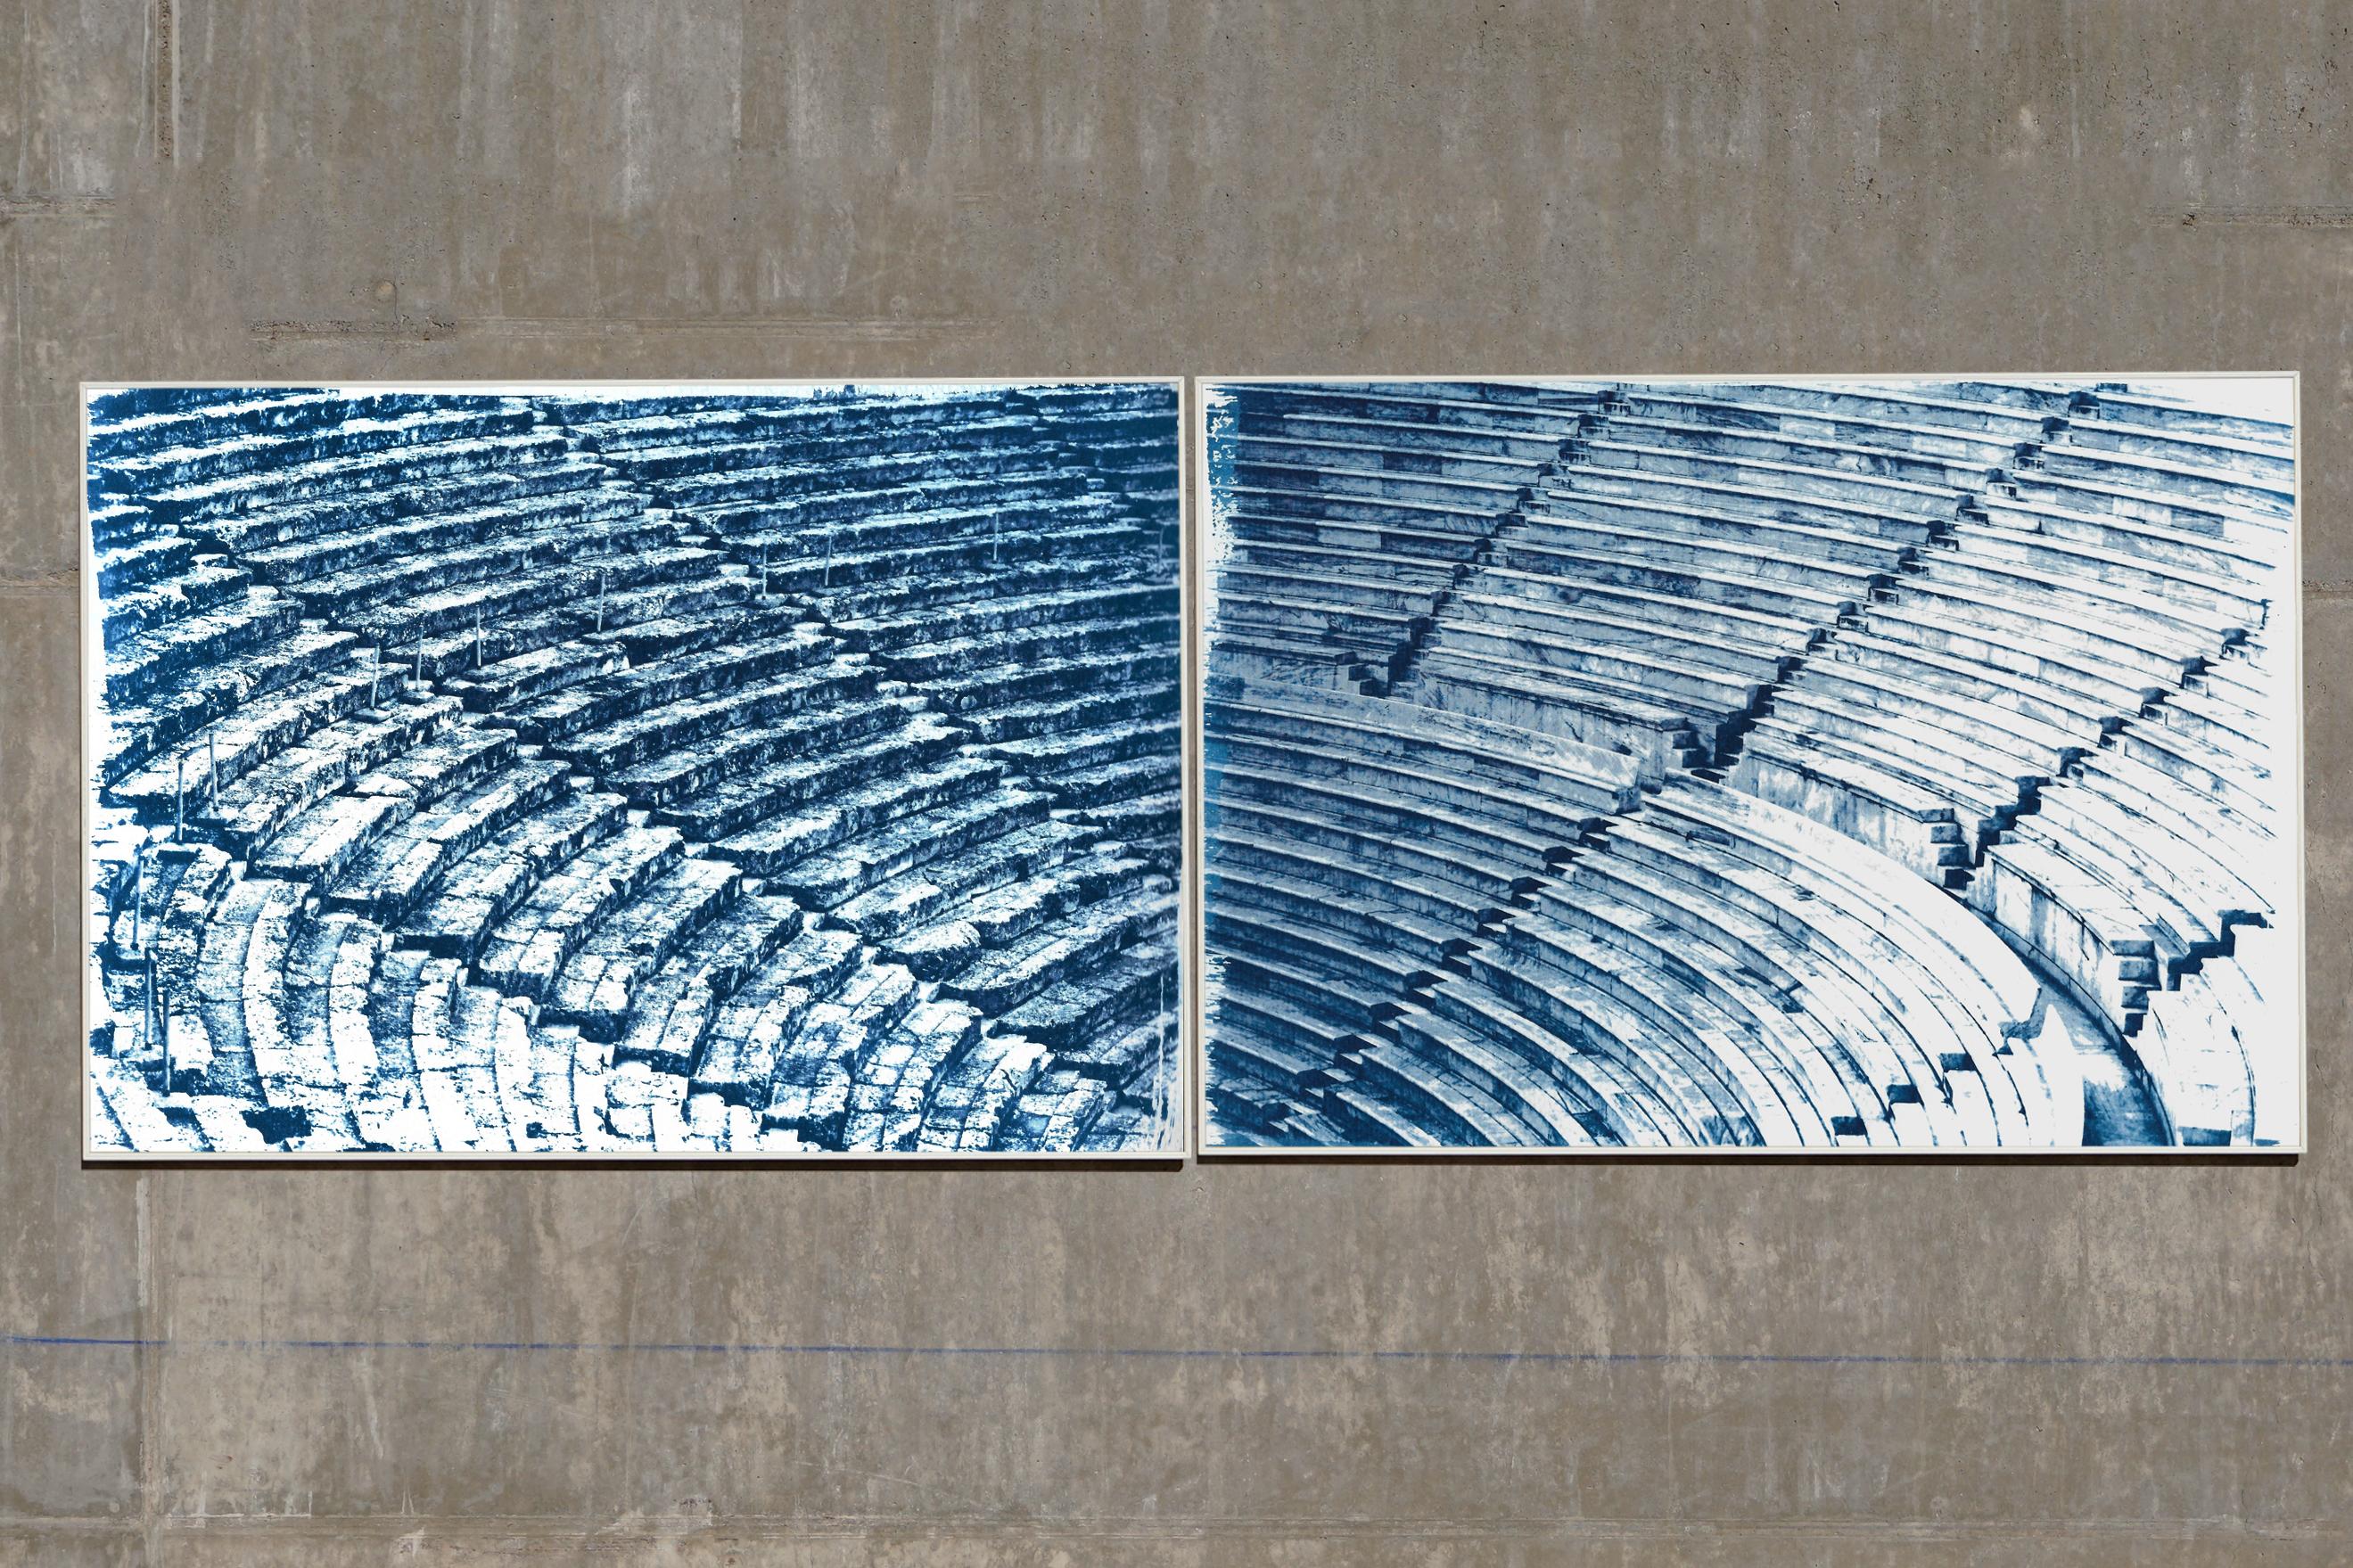 Diptych of Ancient Theatres, Blue Tones Cyanotype, Greek and Roman Architecture - Photograph by Kind of Cyan